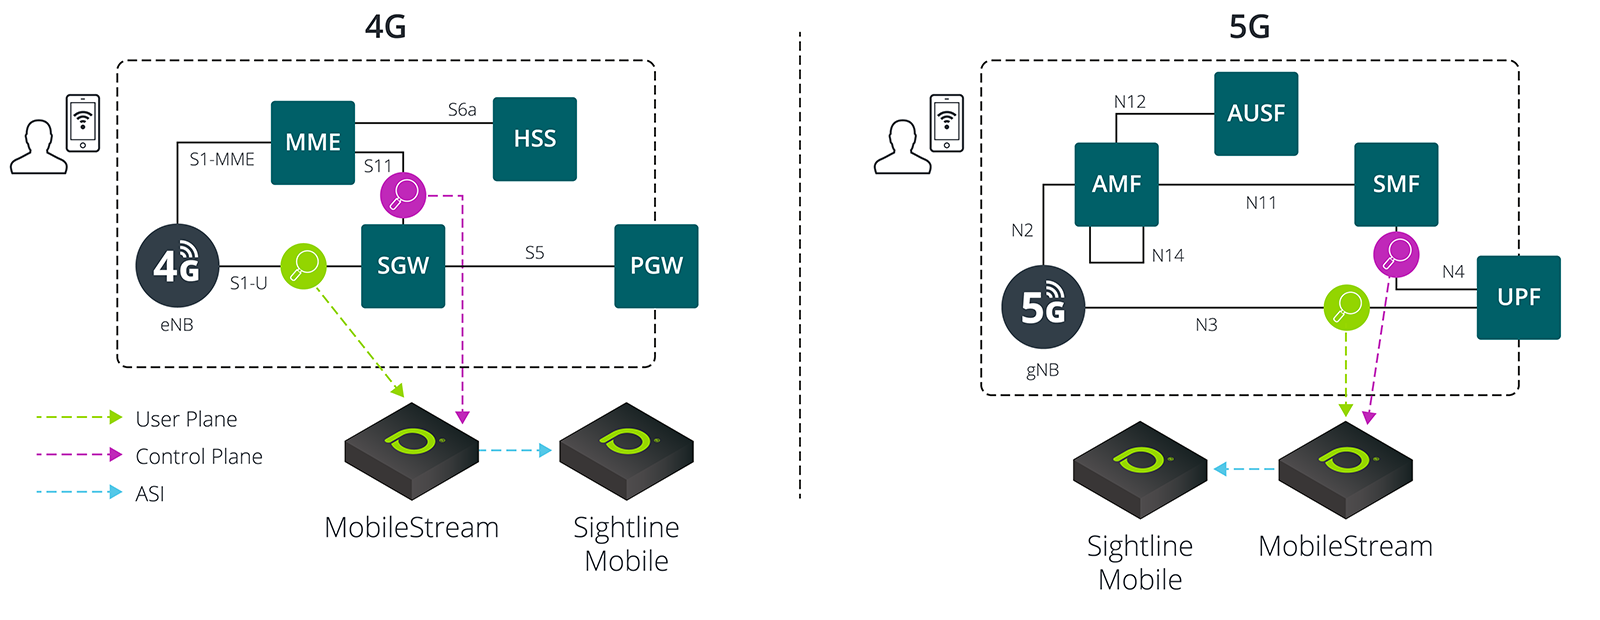 Protect users and infrastructure by identifying security threats in 4G and 5G networks